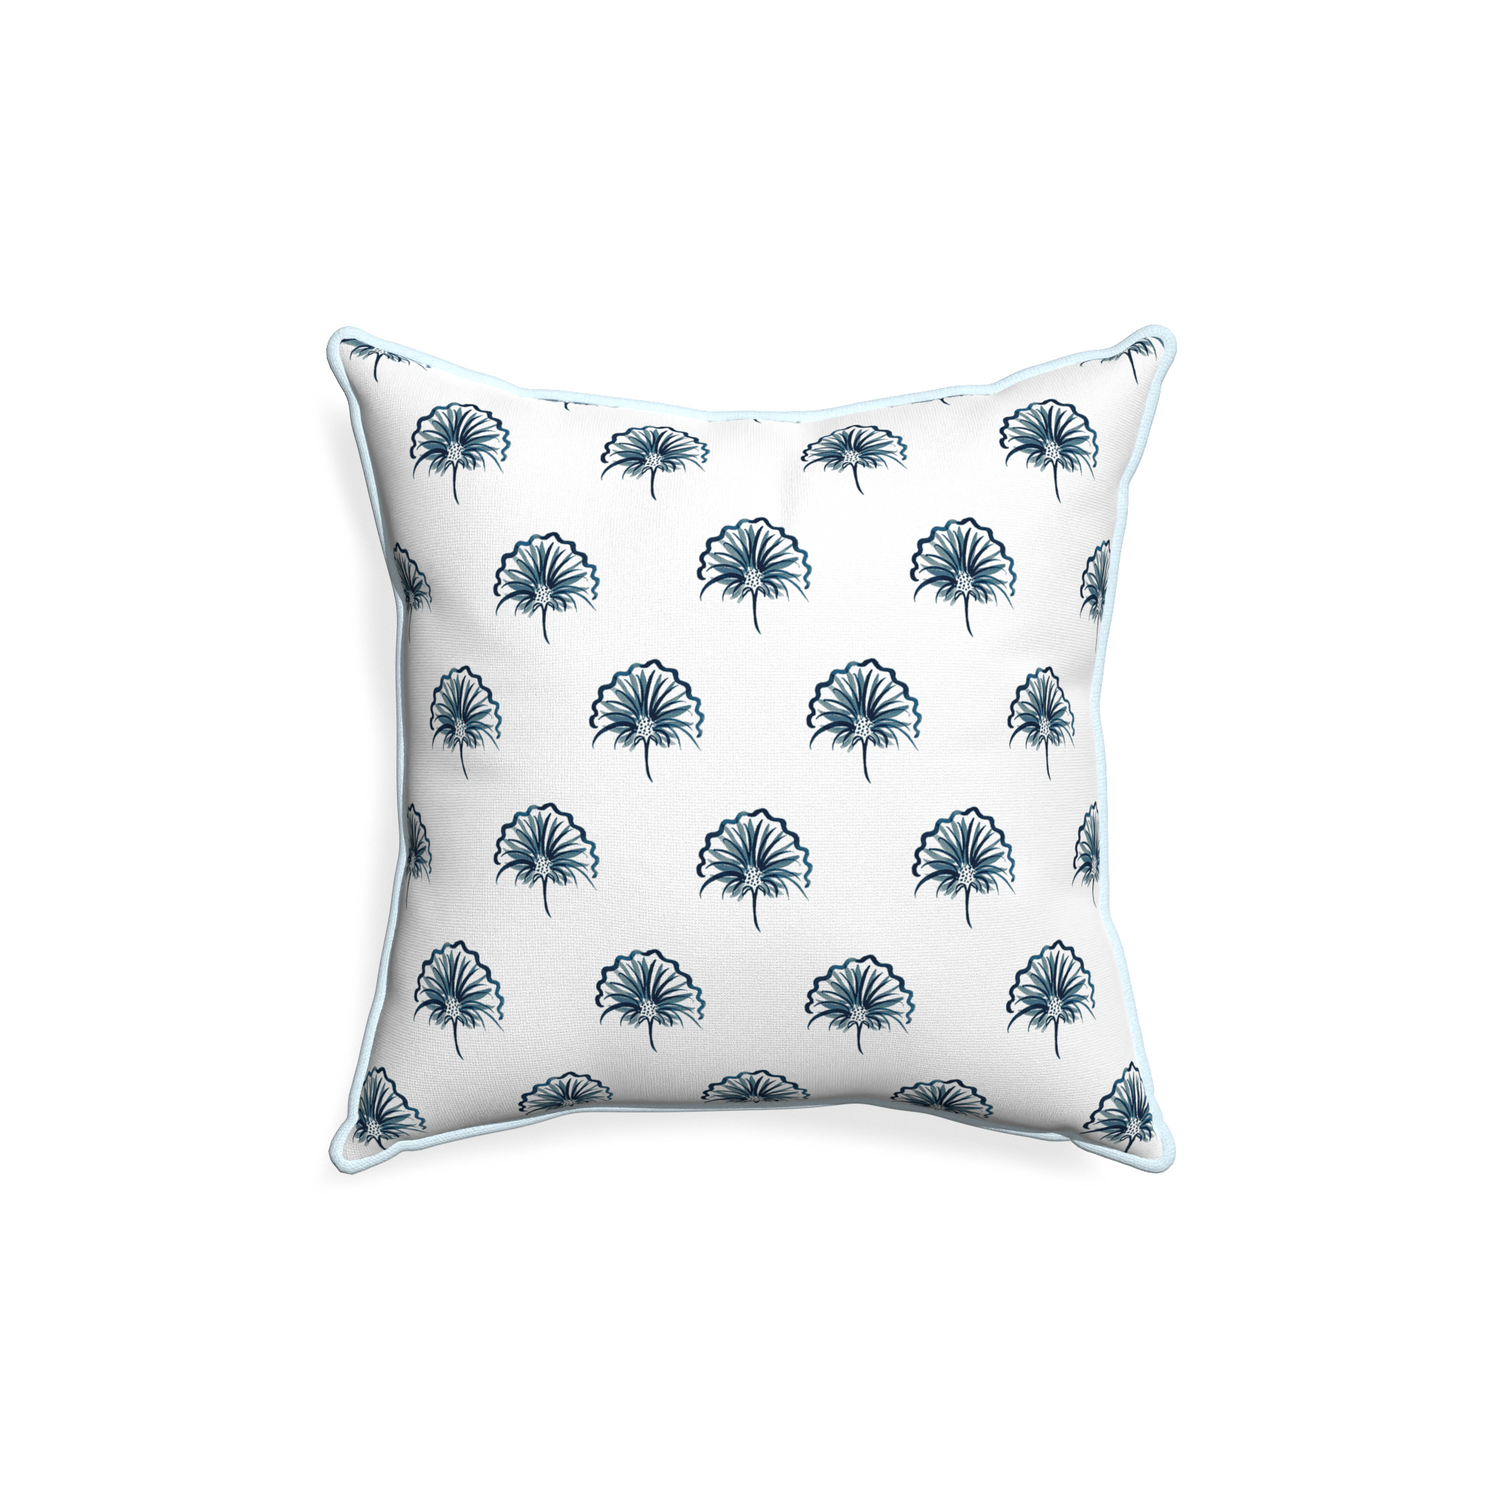 18-square penelope midnight custom floral navypillow with powder piping on white background